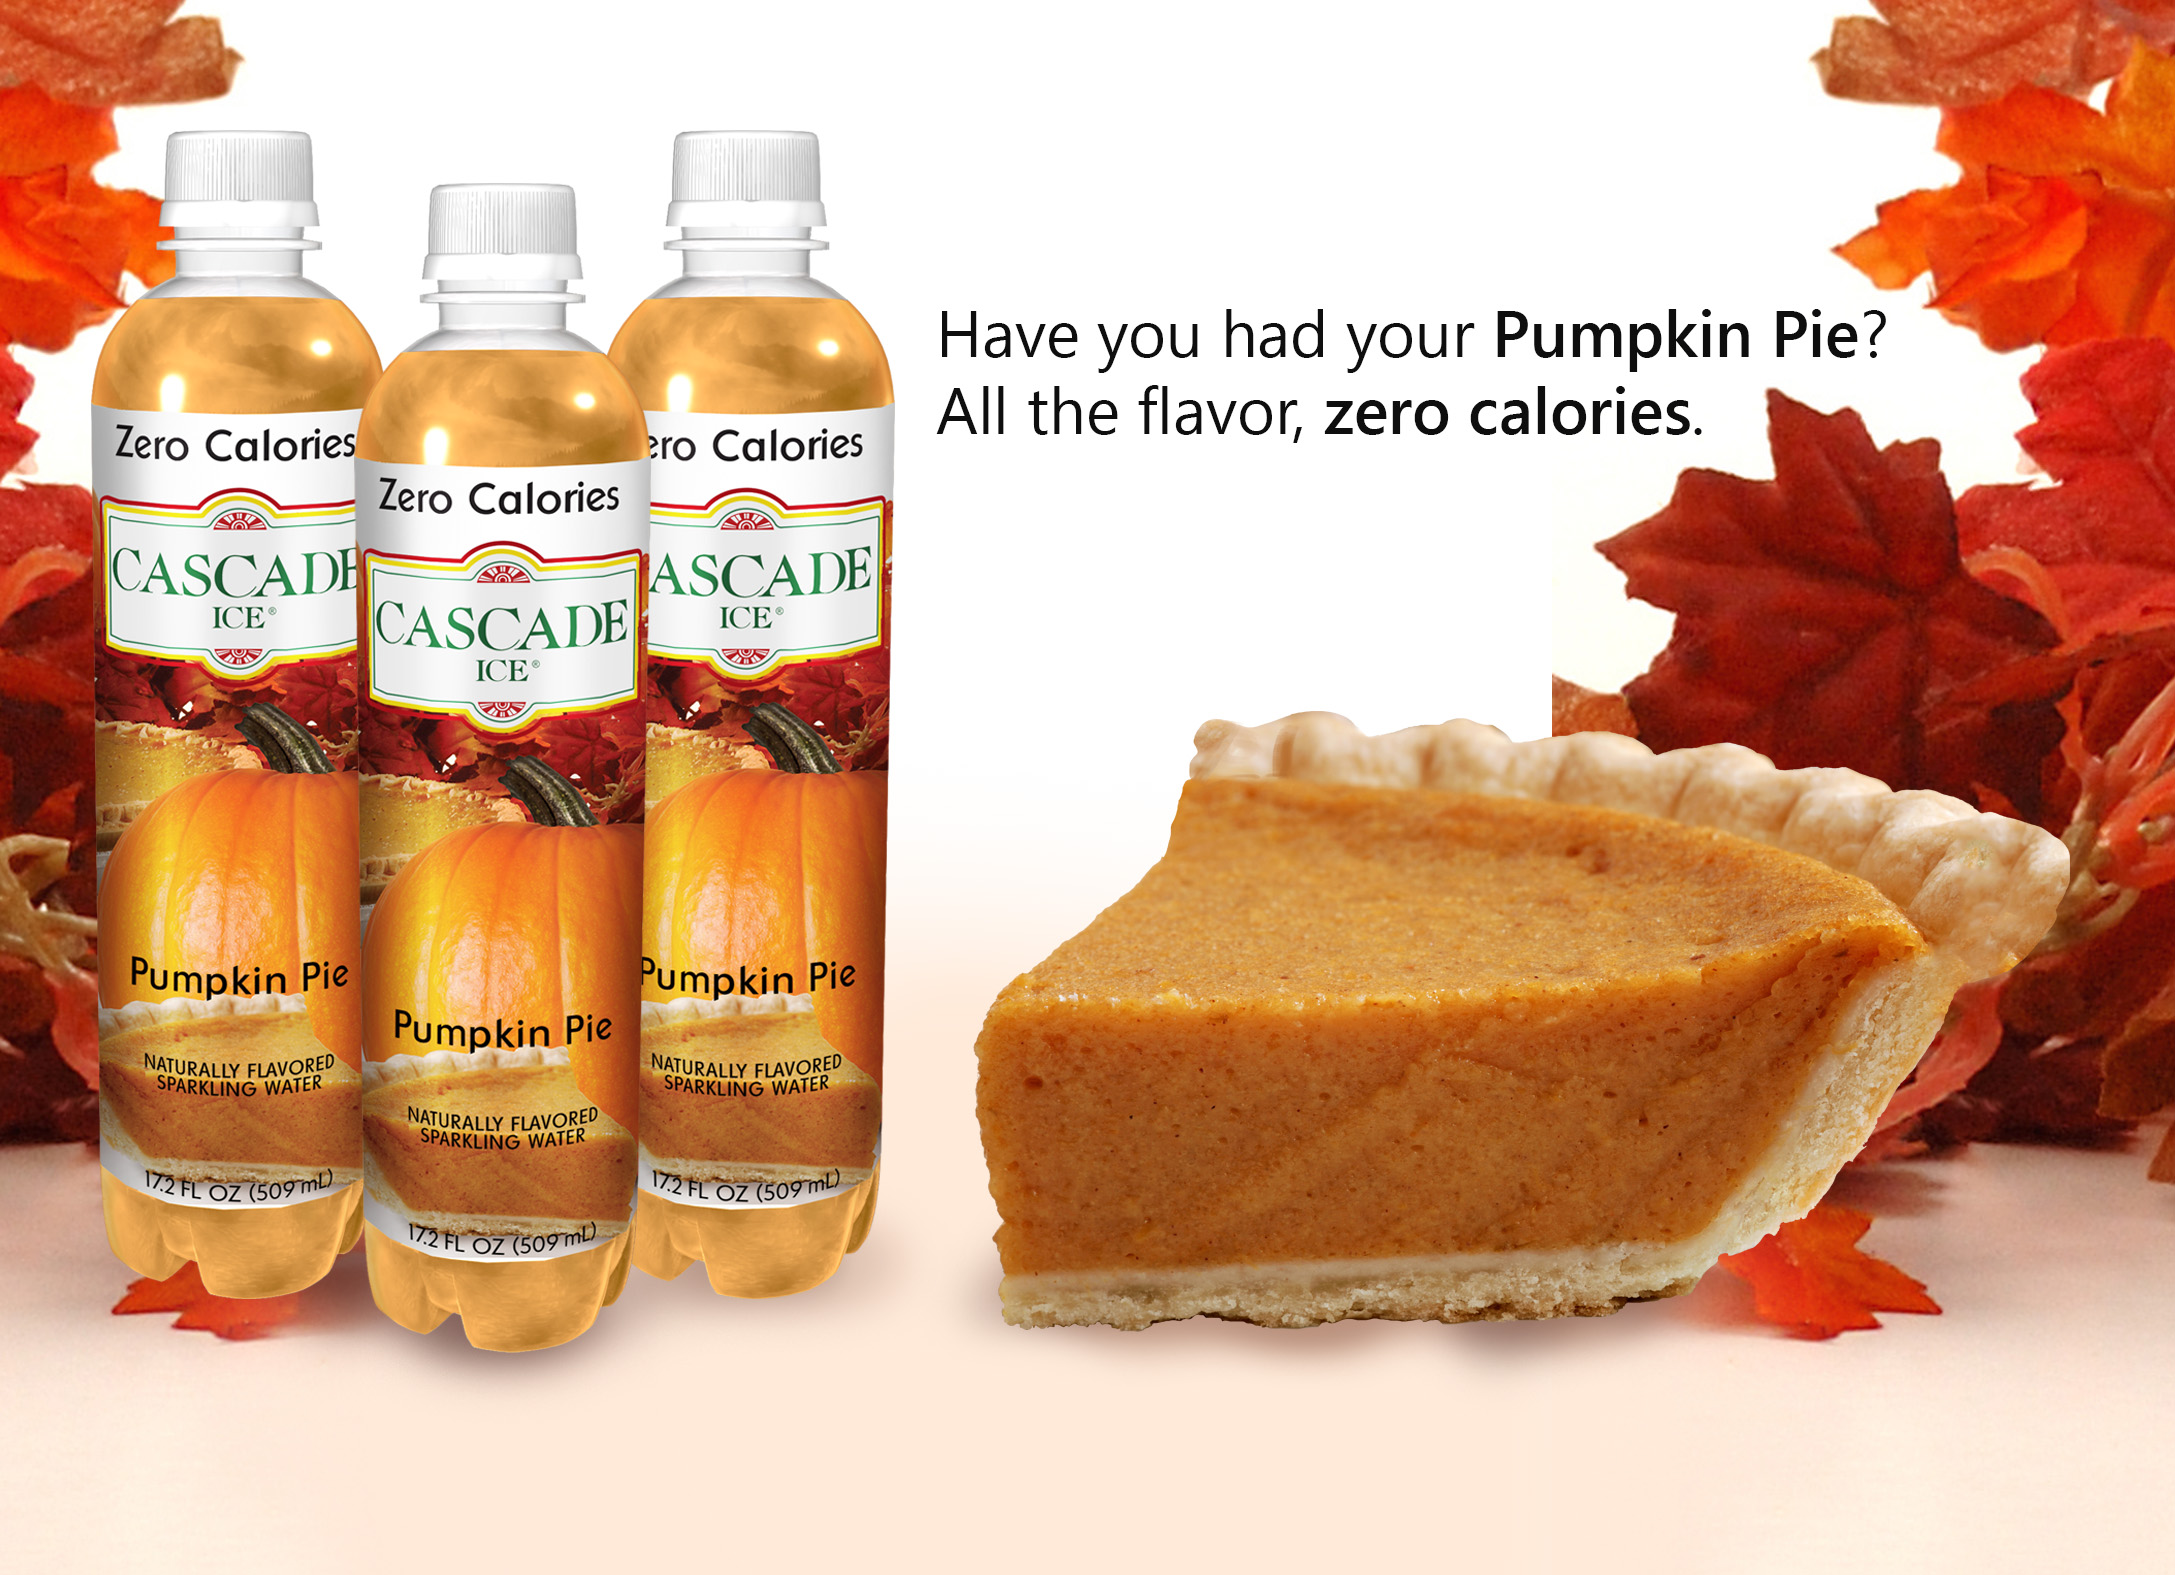 Cascade Ice Celebrates Fall with New Pumpkin Pie Flavor | The ...